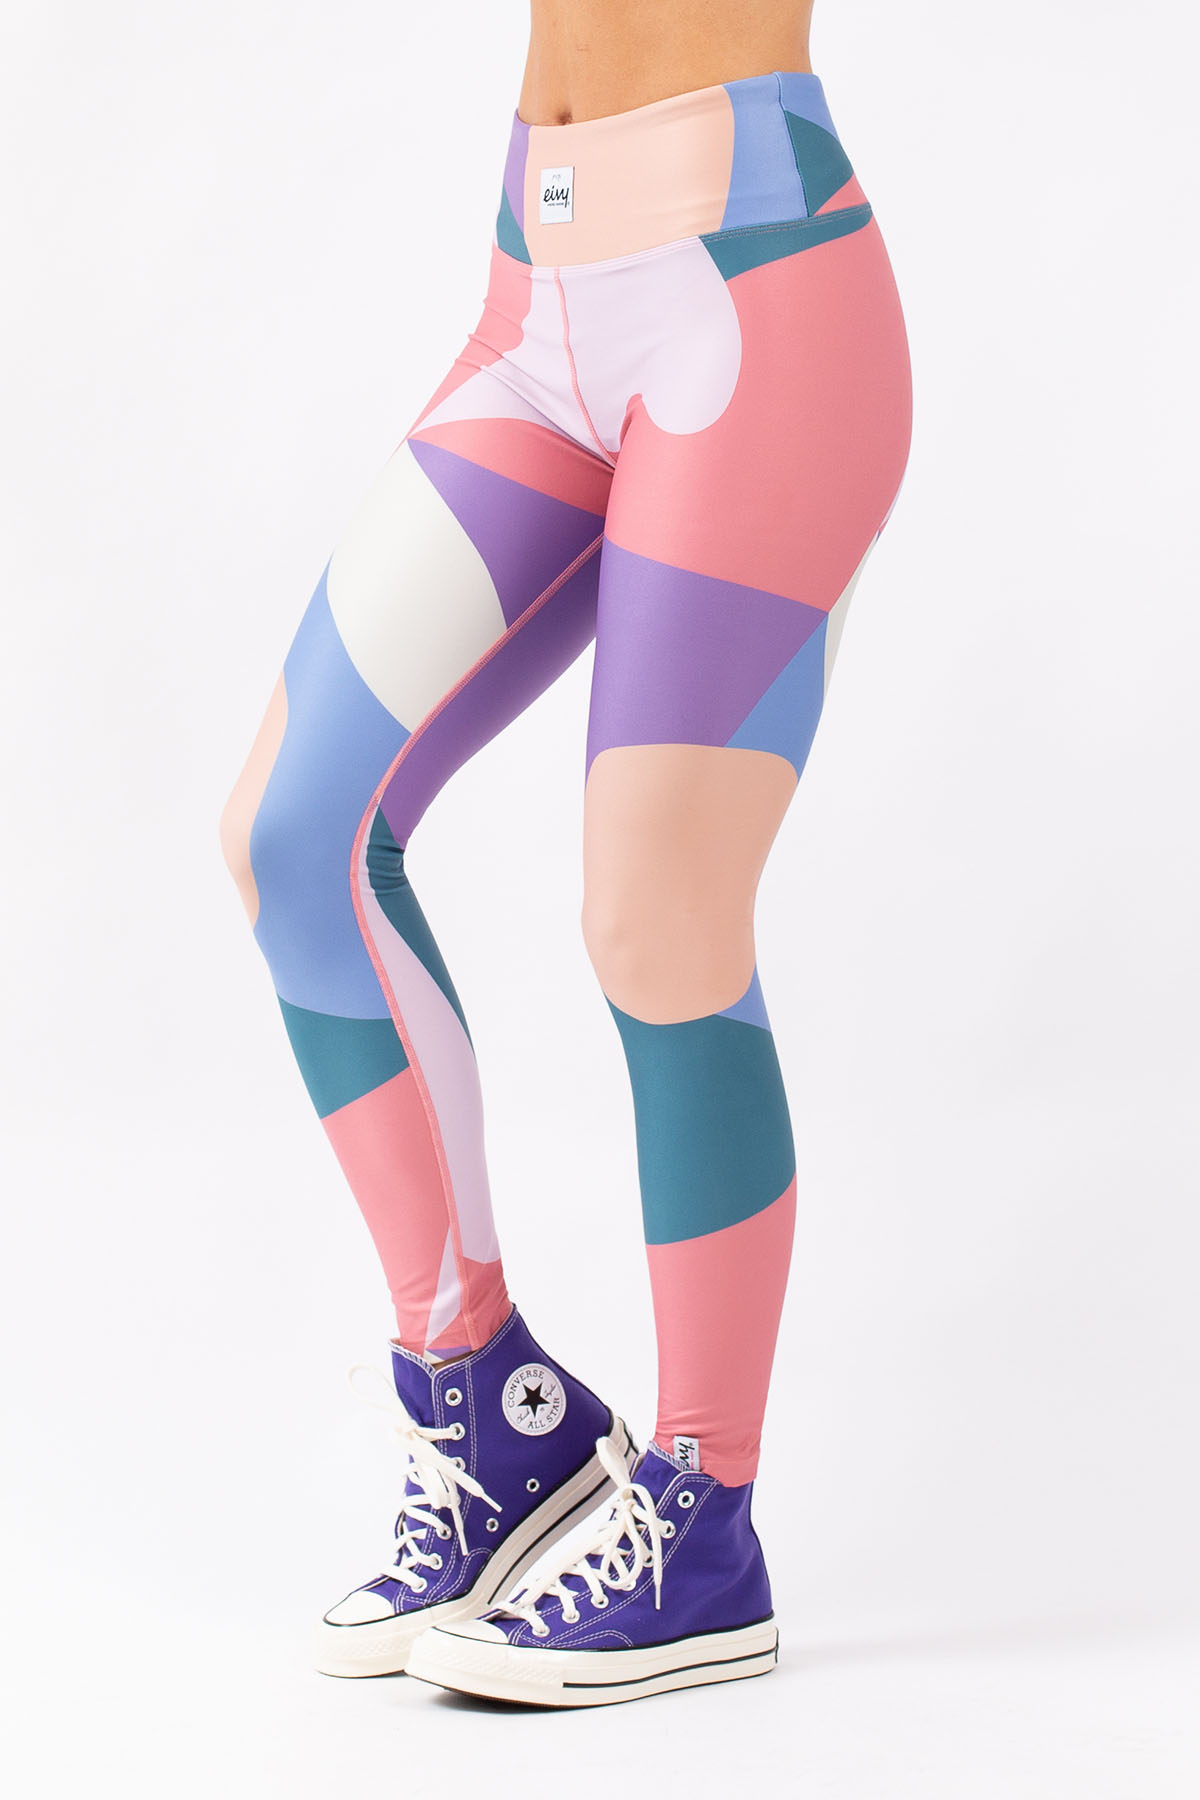 Icecold Tights - Abstract Shapes | M